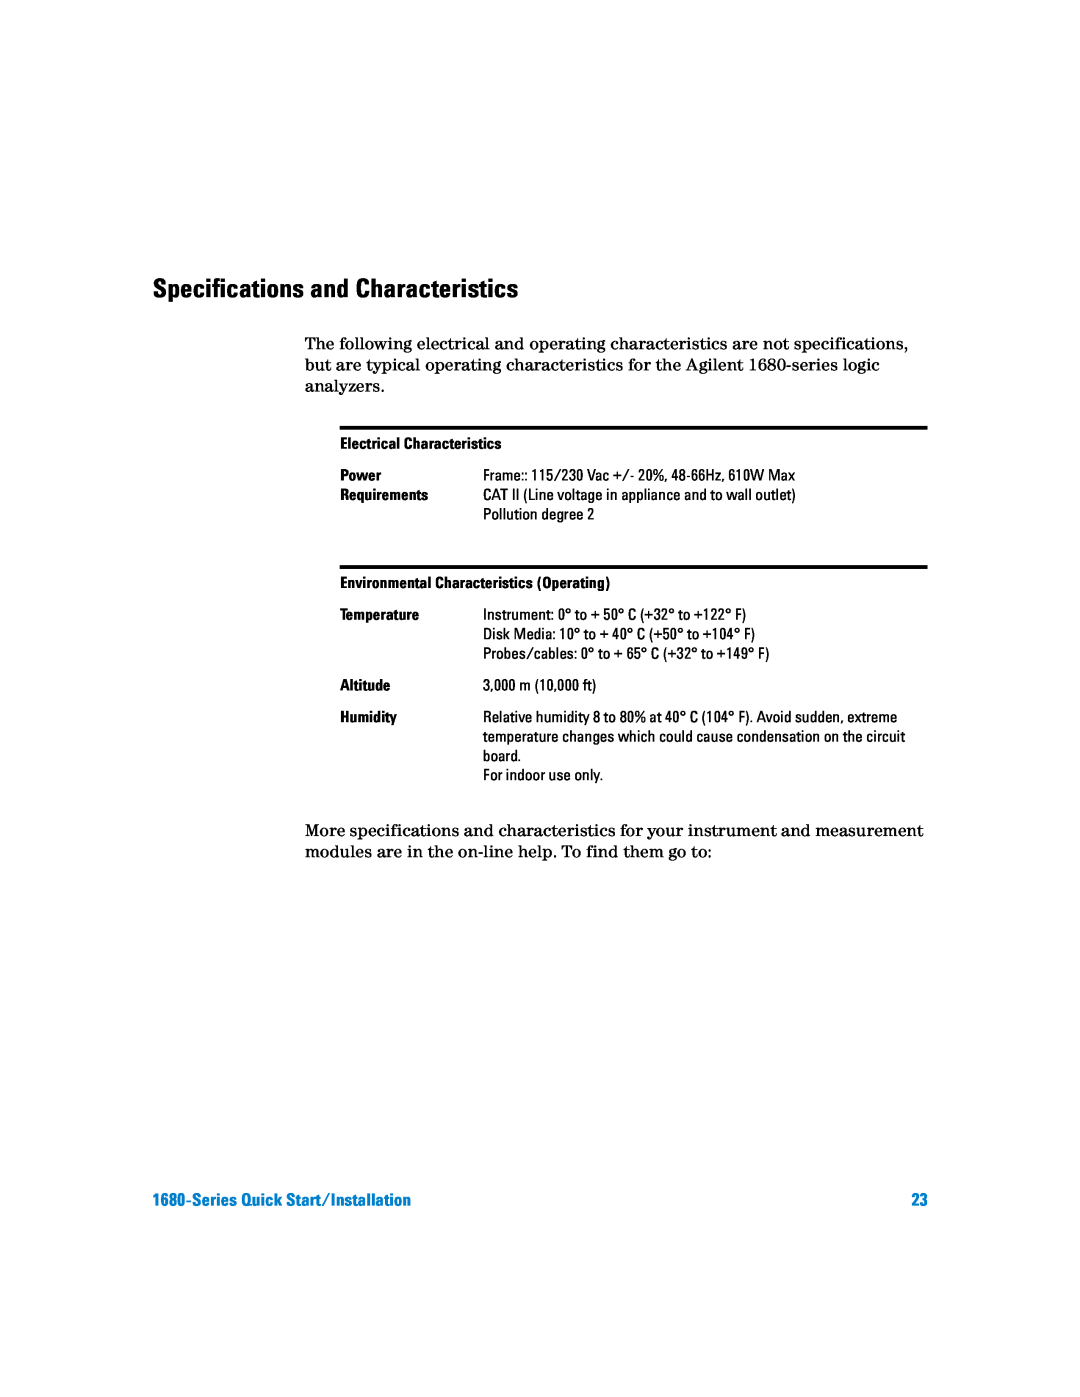 Agilent Technologies 1680 Specifications and Characteristics, Series Quick Start/Installation, Electrical Characteristics 